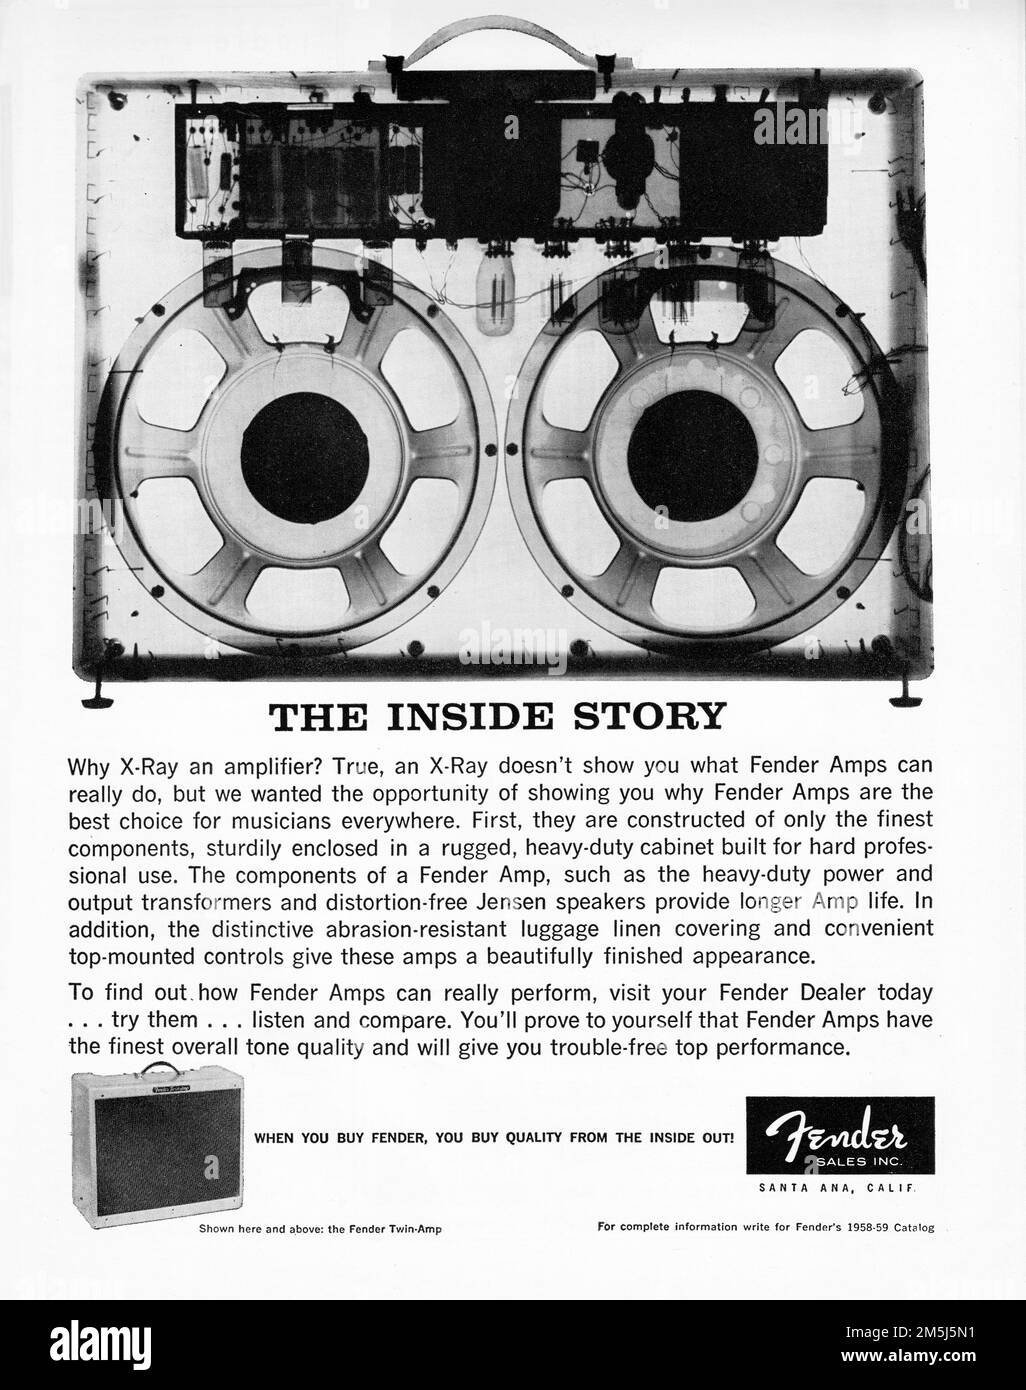 An advertisement for fender amplifiers showing an exray and lauding their quality construction. from an early 1960s periodical. Stock Photo